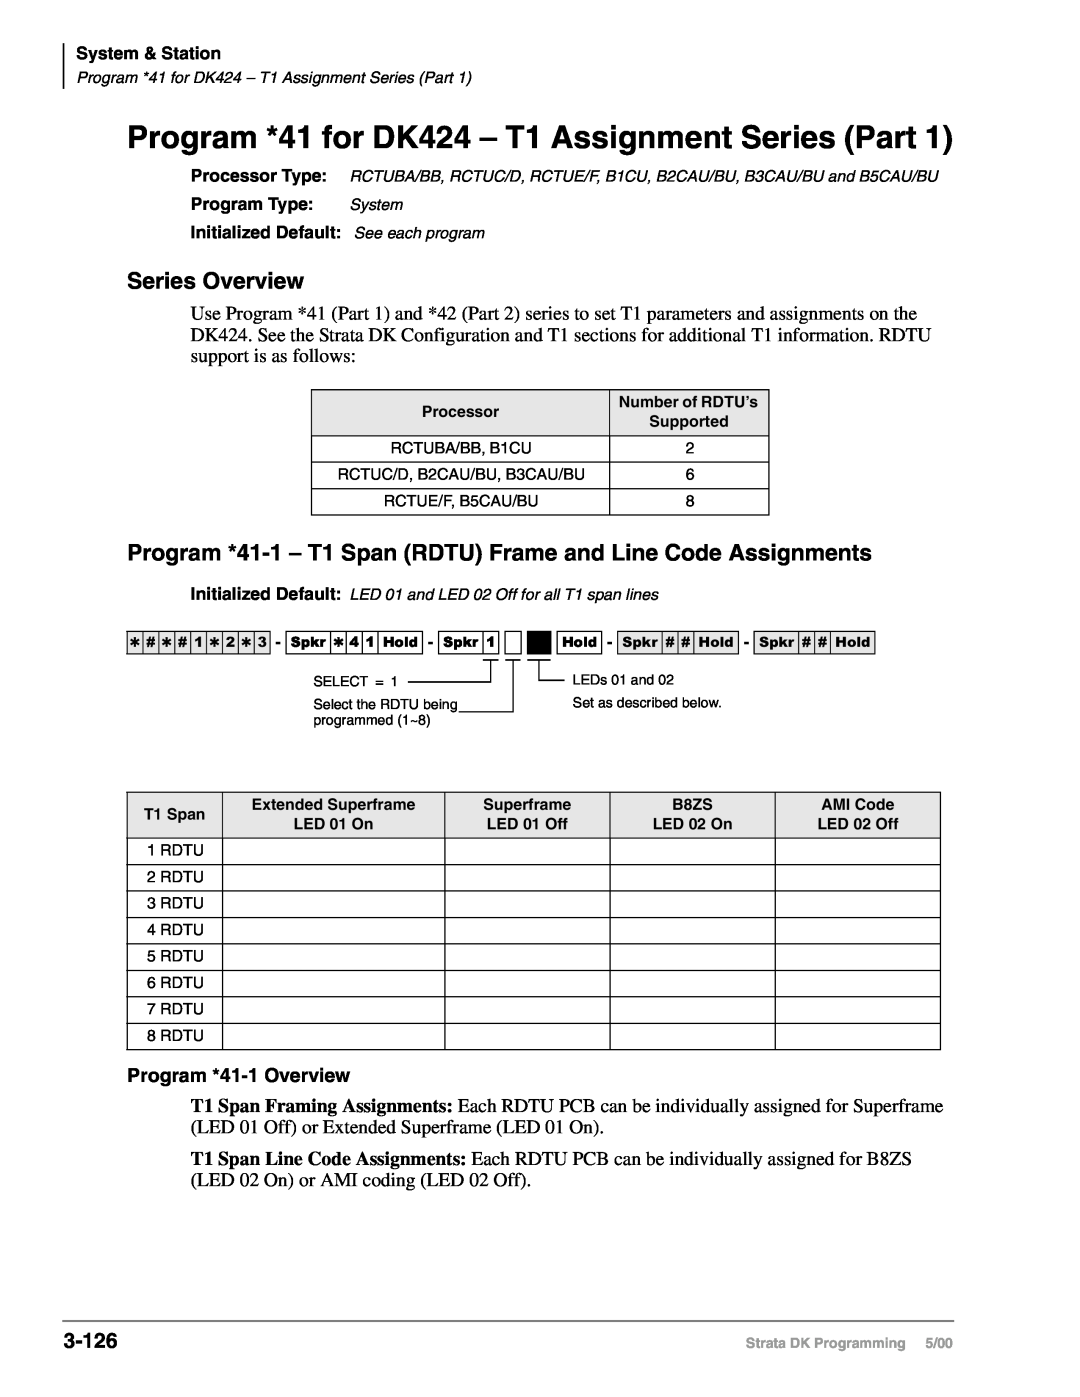 Toshiba DK40I, dk14 manual Program *41 for DK424 – T1 Assignment Series Part, Series Overview, 3-126, Program *41-1Overview 